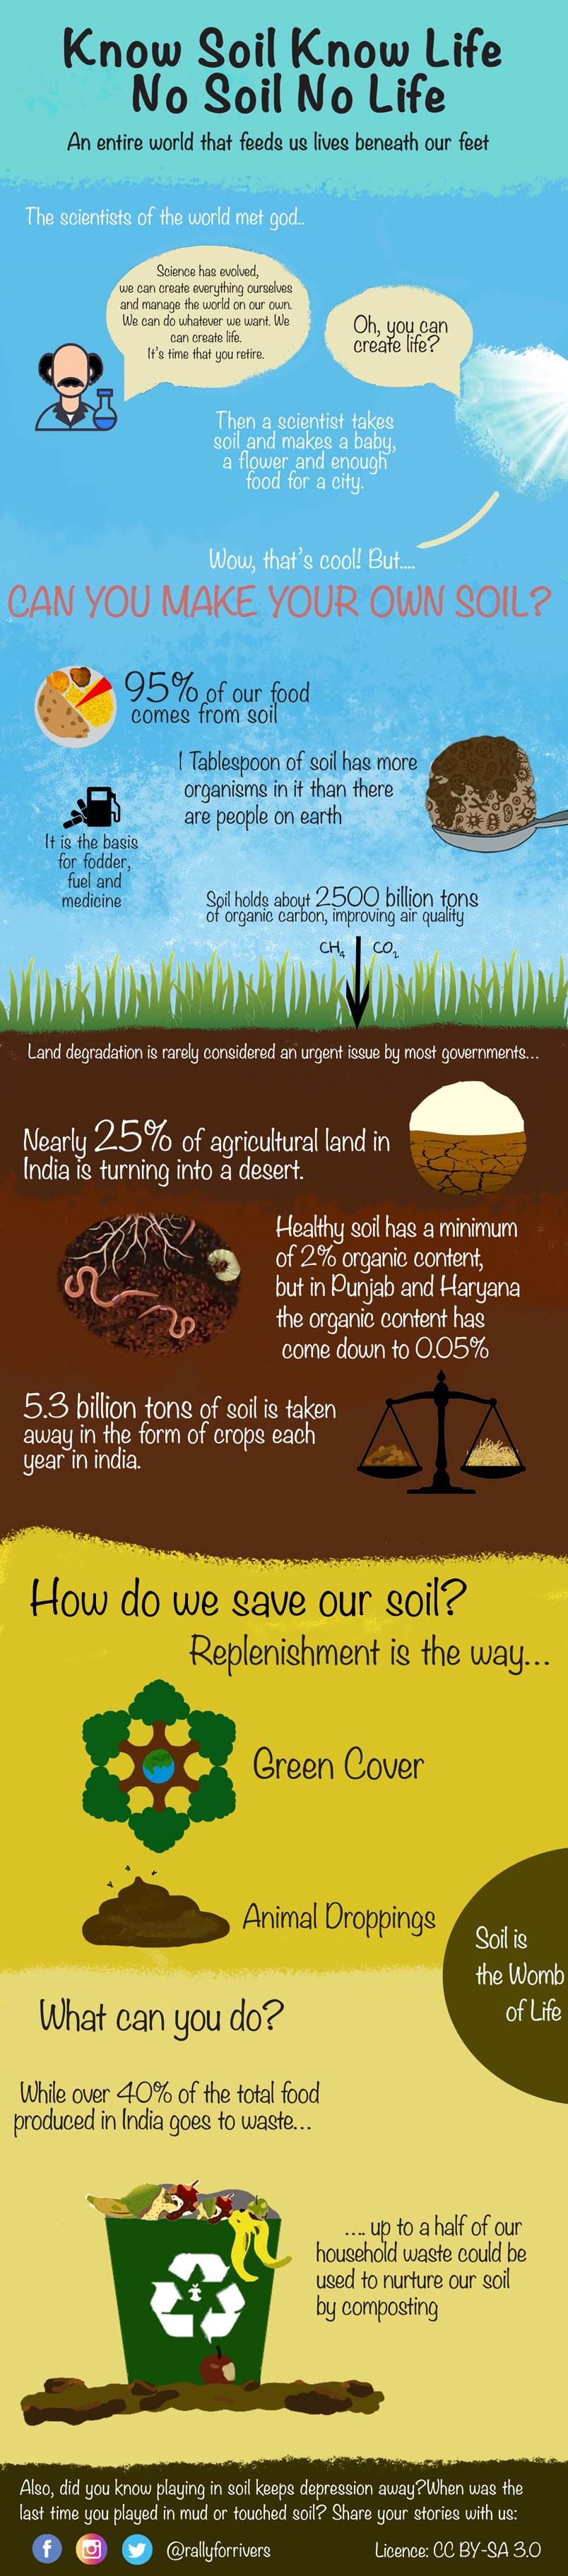 Know Soil Know Life infographic 